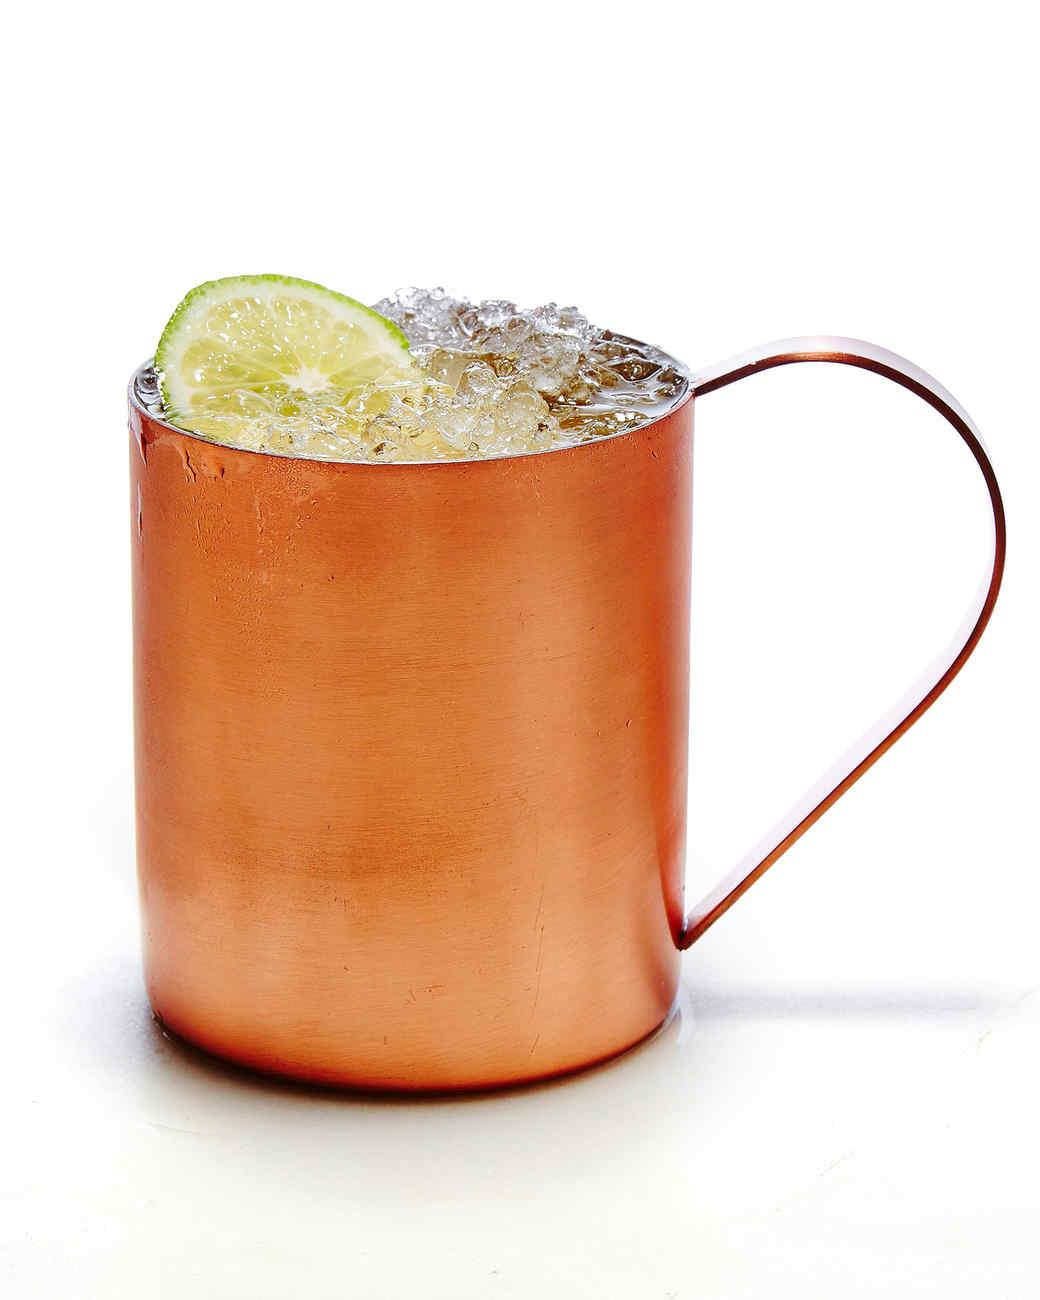 Moscow-mule-cocktail-102882437_vert